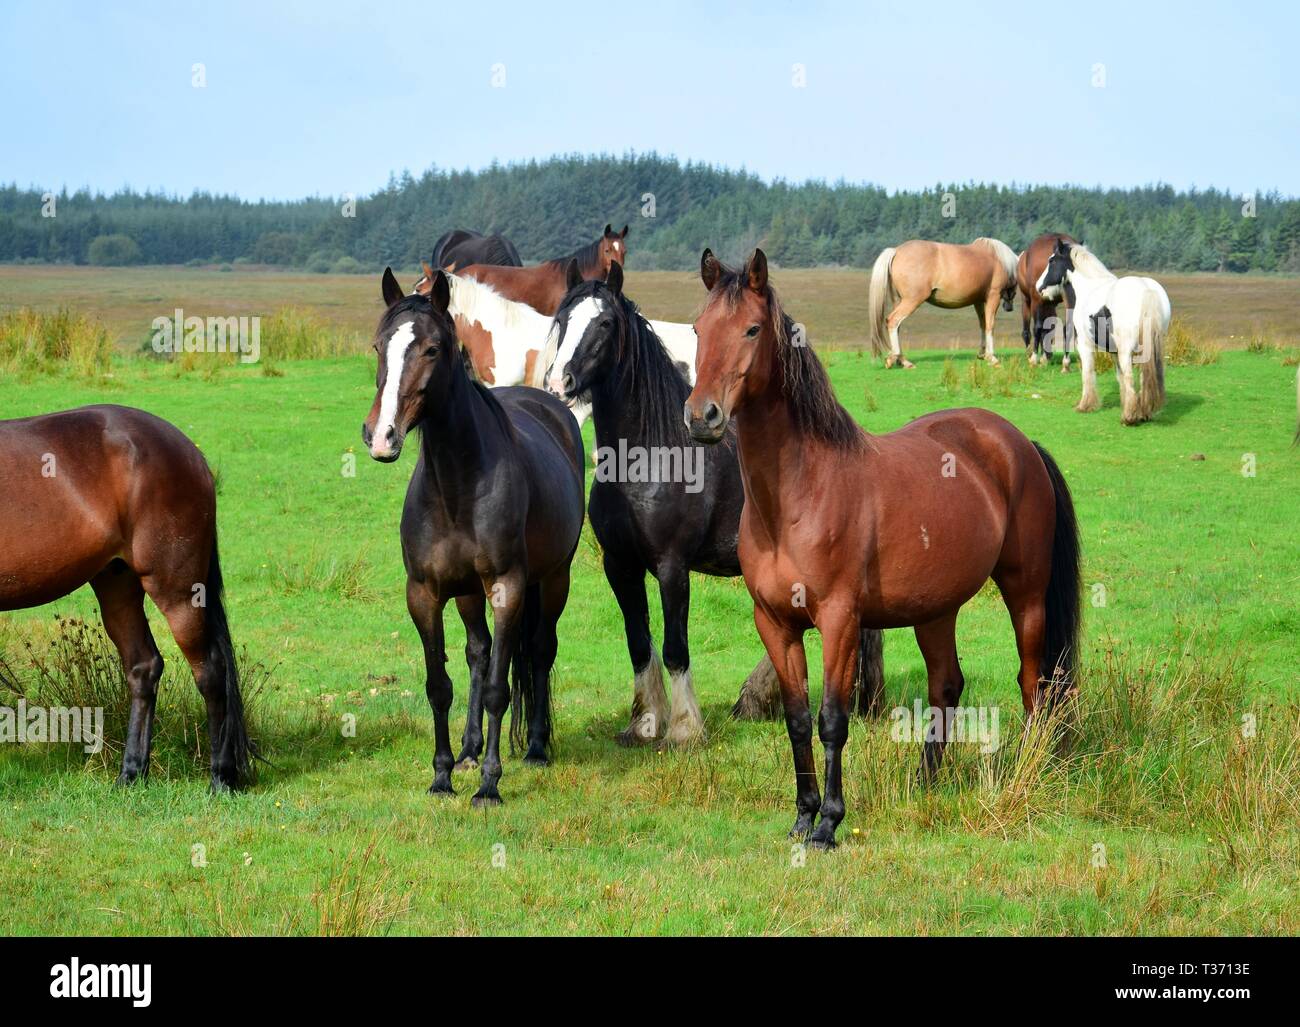 Horses on a meadow in Ireland. Three horses in front, looking attentively in the same direction. Irish landscape in the background. Stock Photo